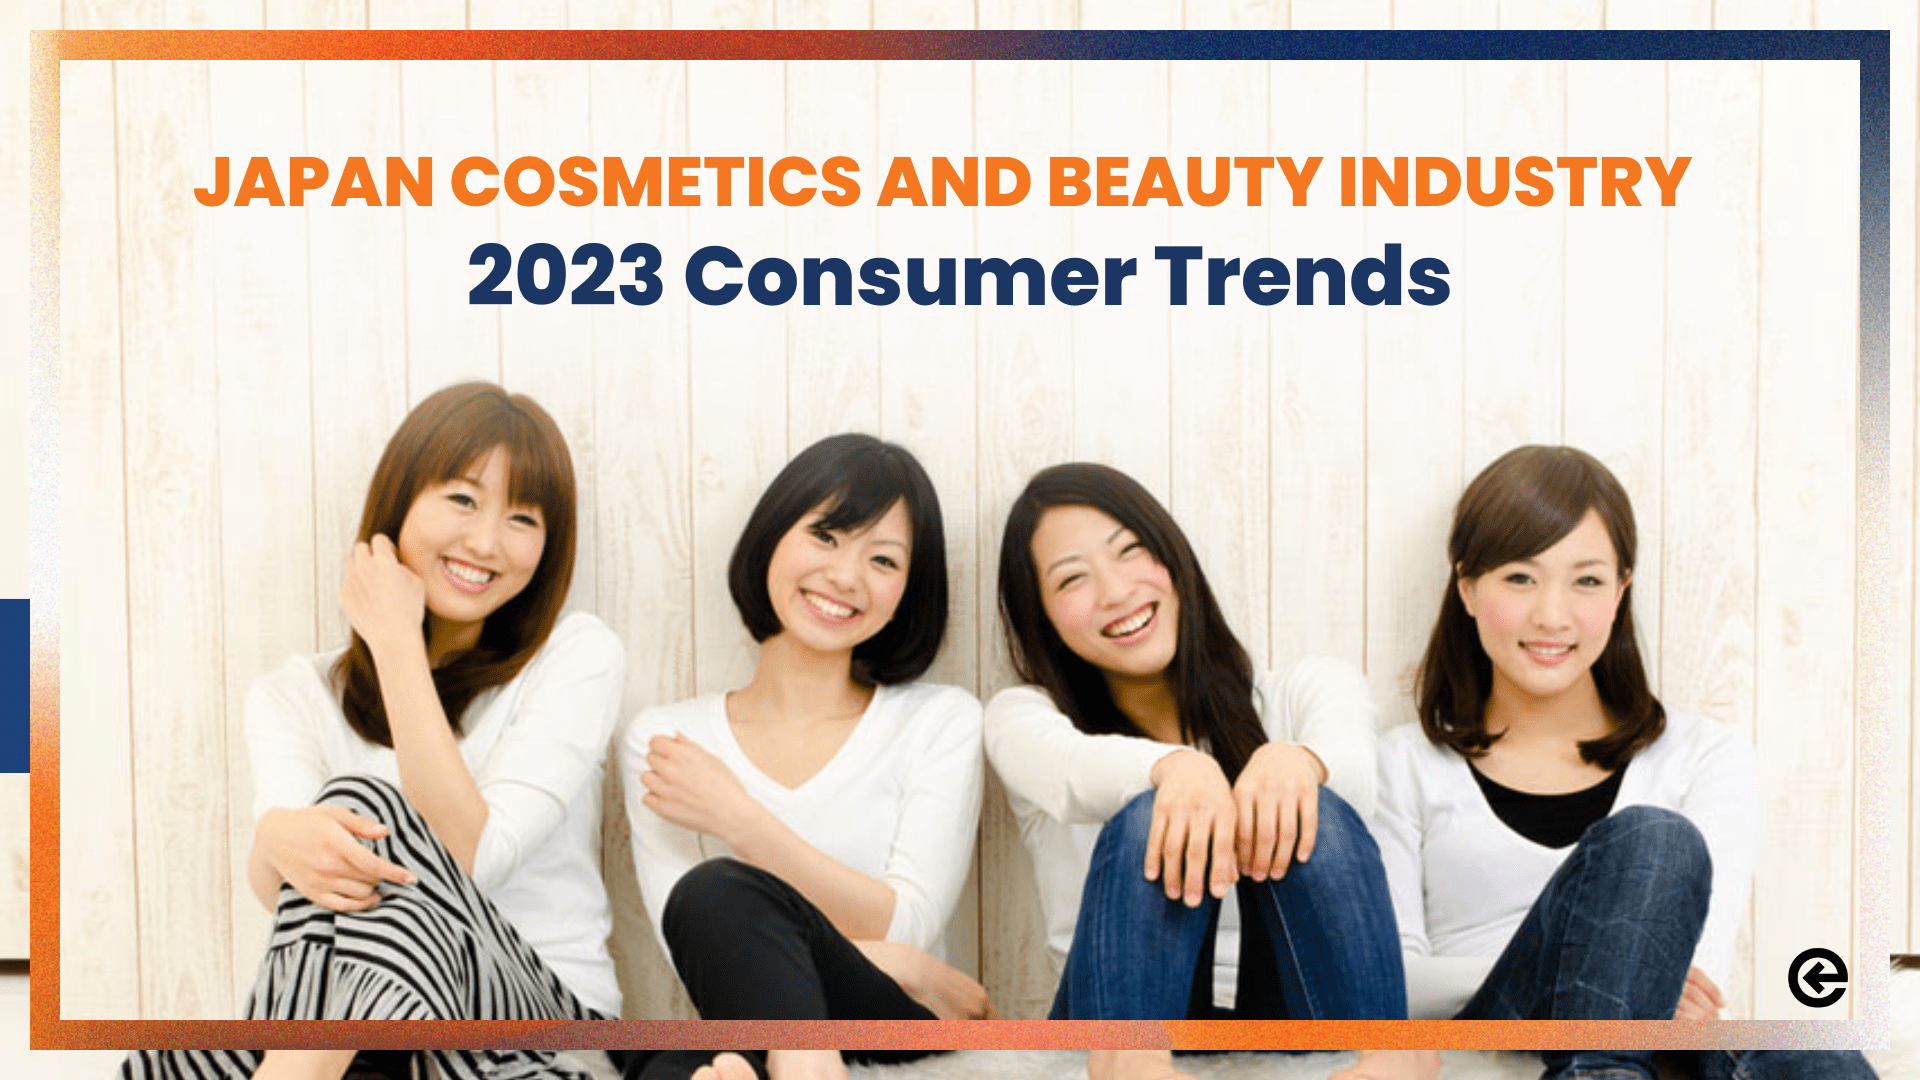 Thriving Cosmetics Beauty Industry in Japan: Watch these Consumer Trends in 2023 